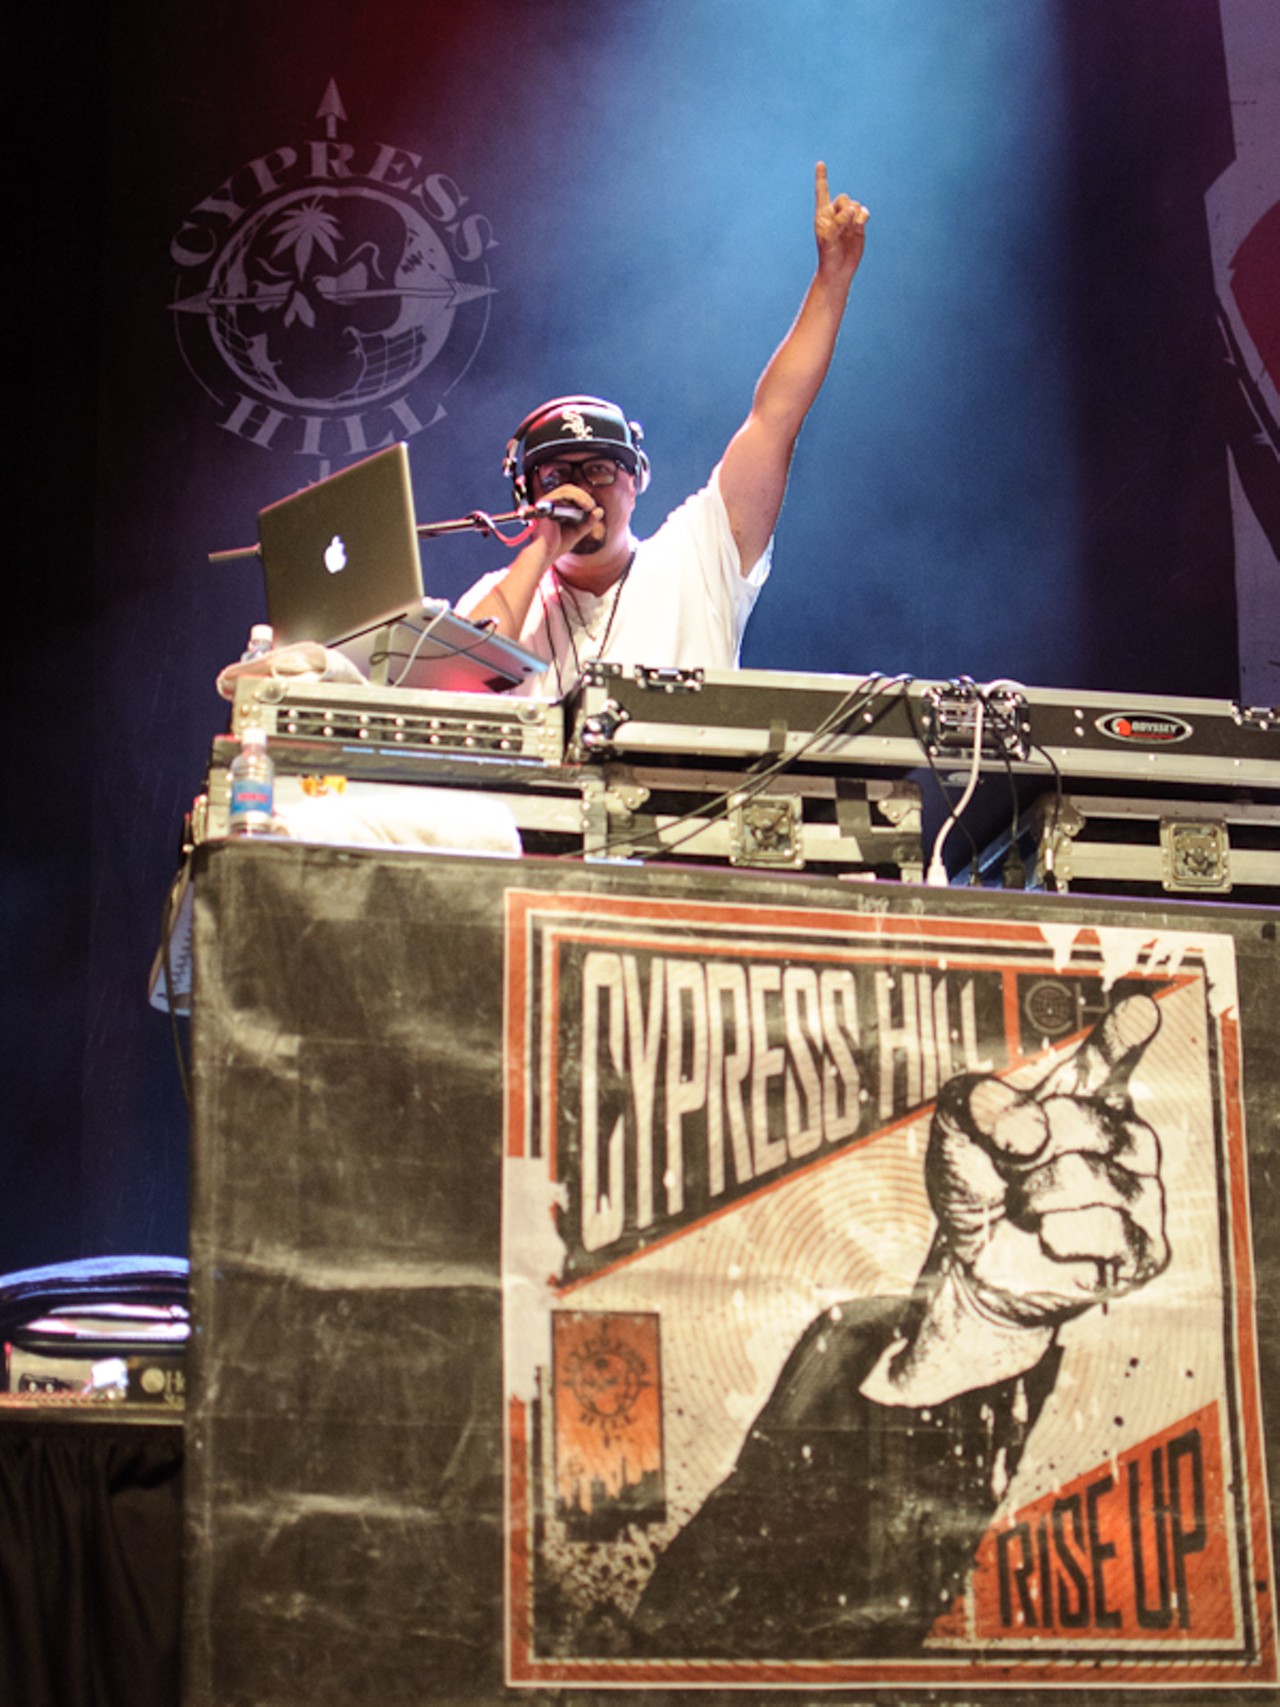 Julio G performing with Cypress Hill at the Pageant.